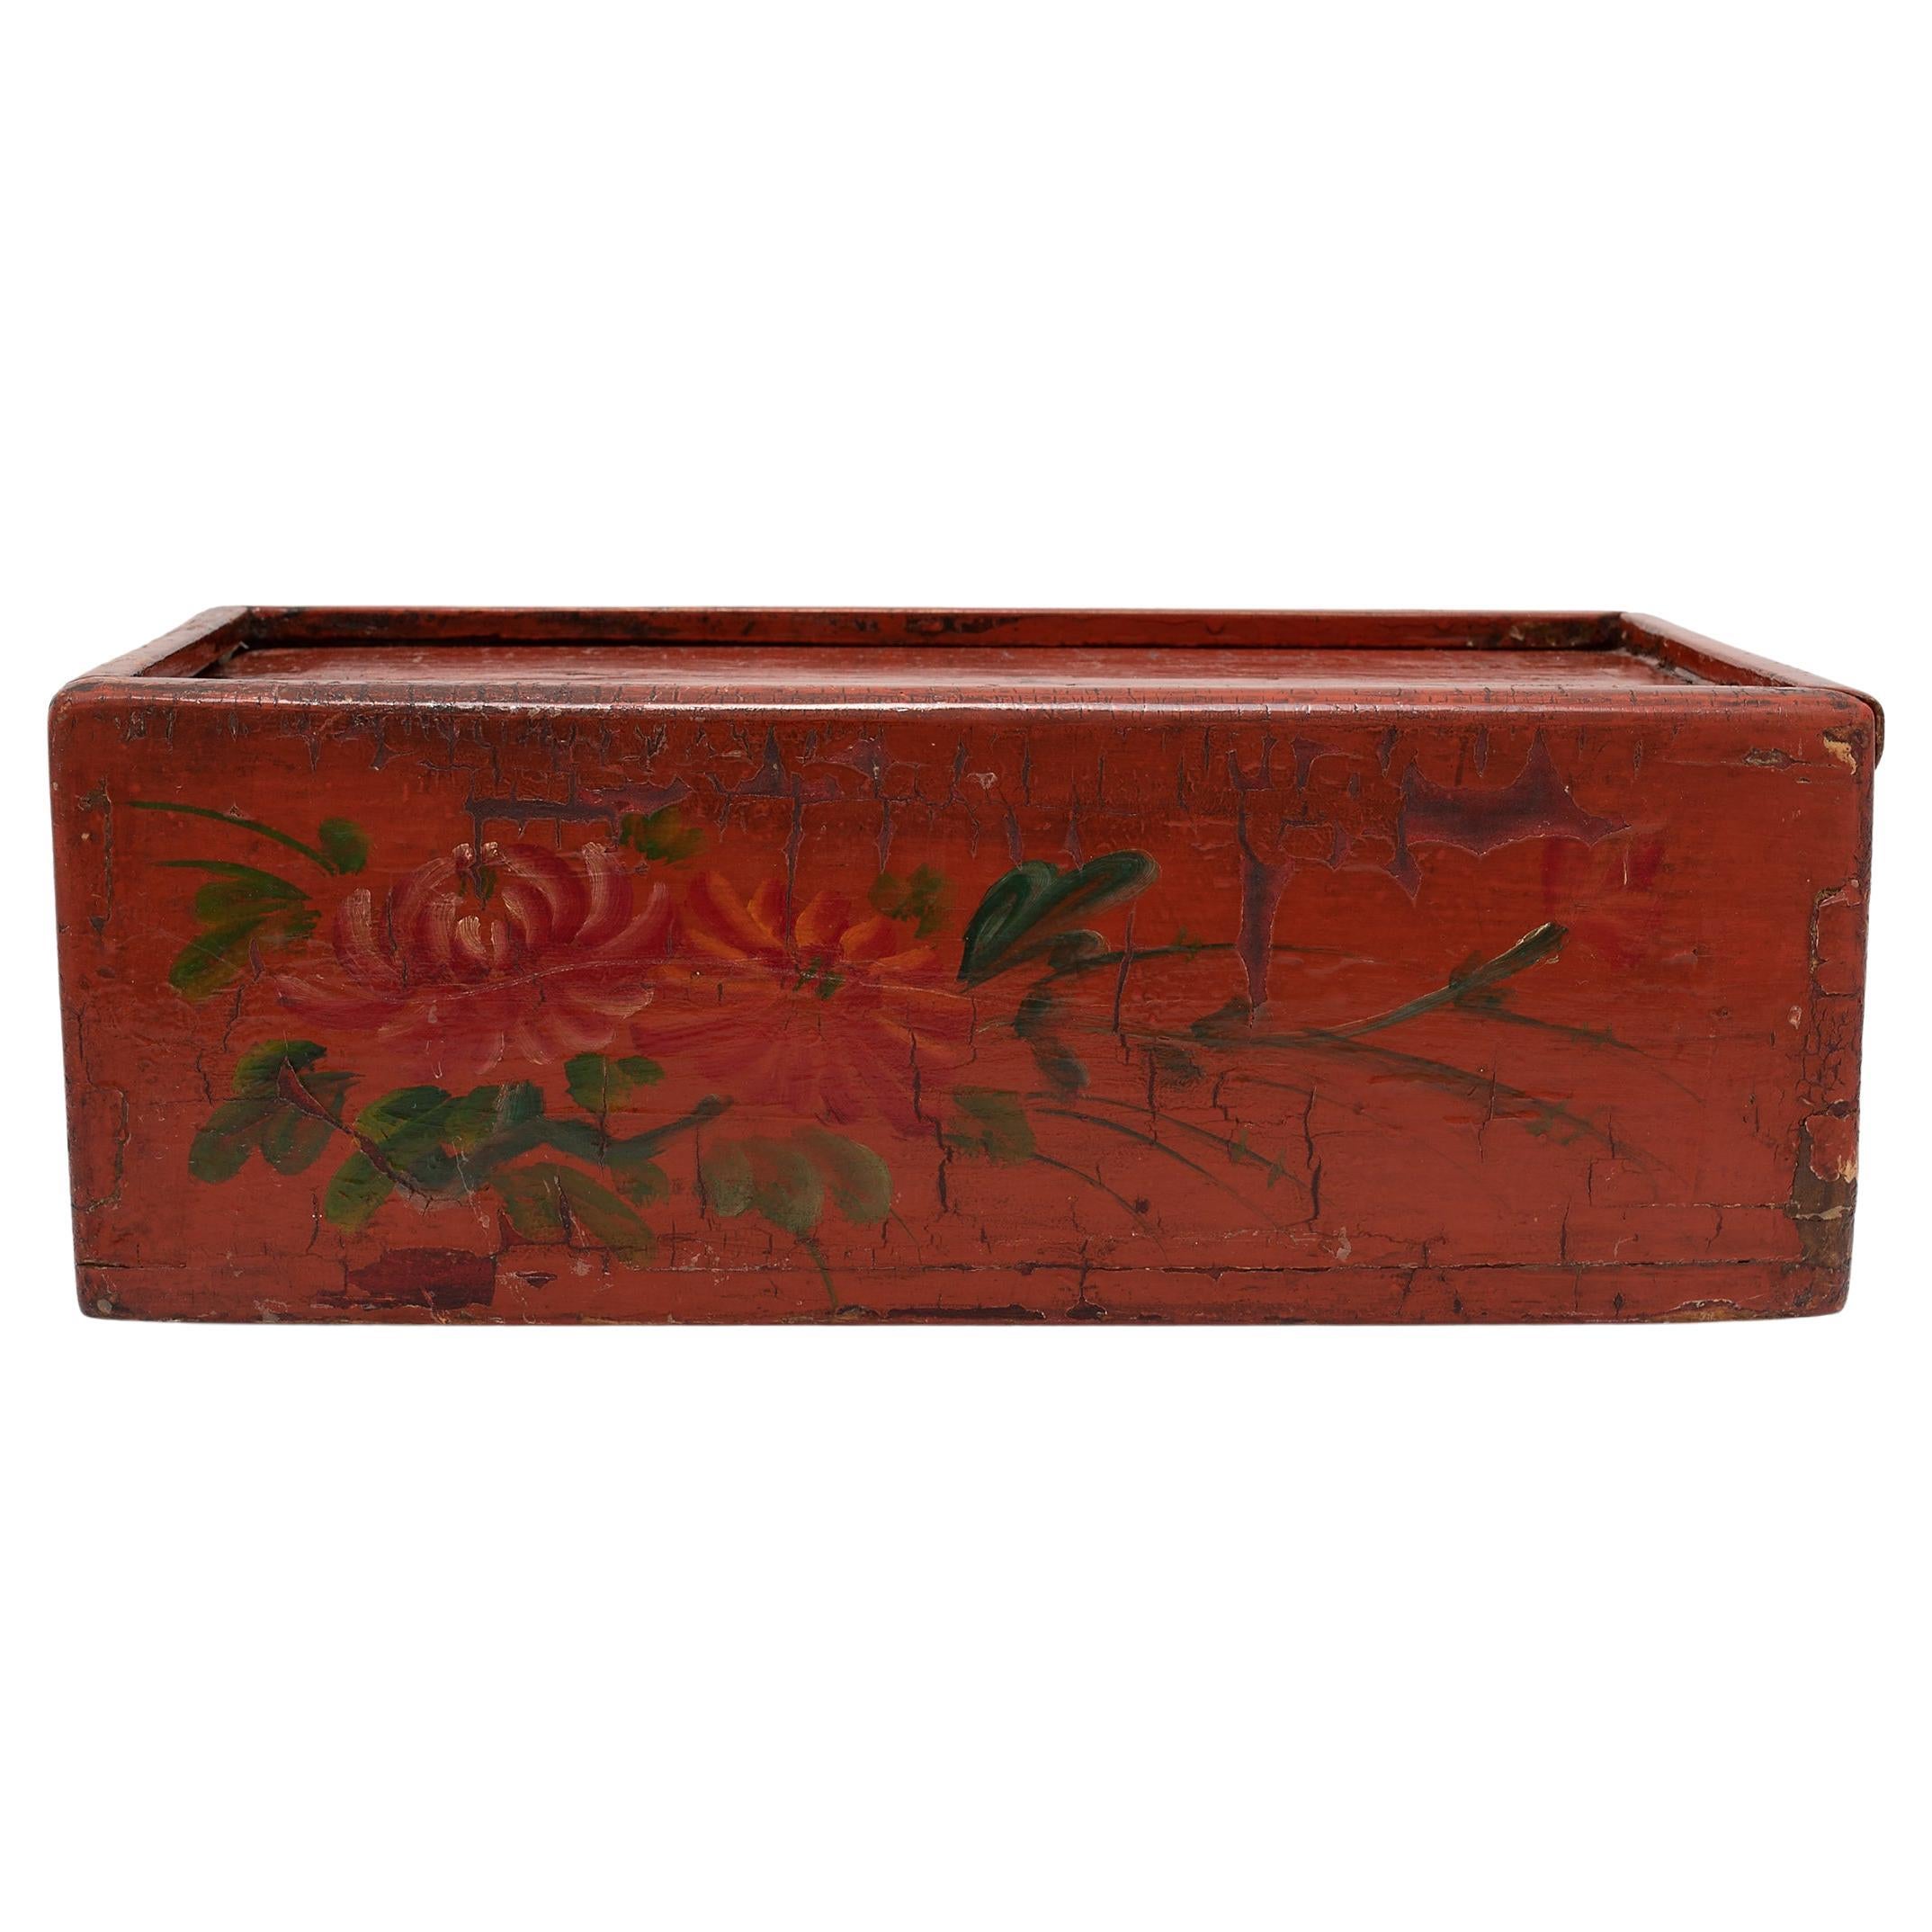 Chinese Painted Orange Lacquer Box, c. 1850